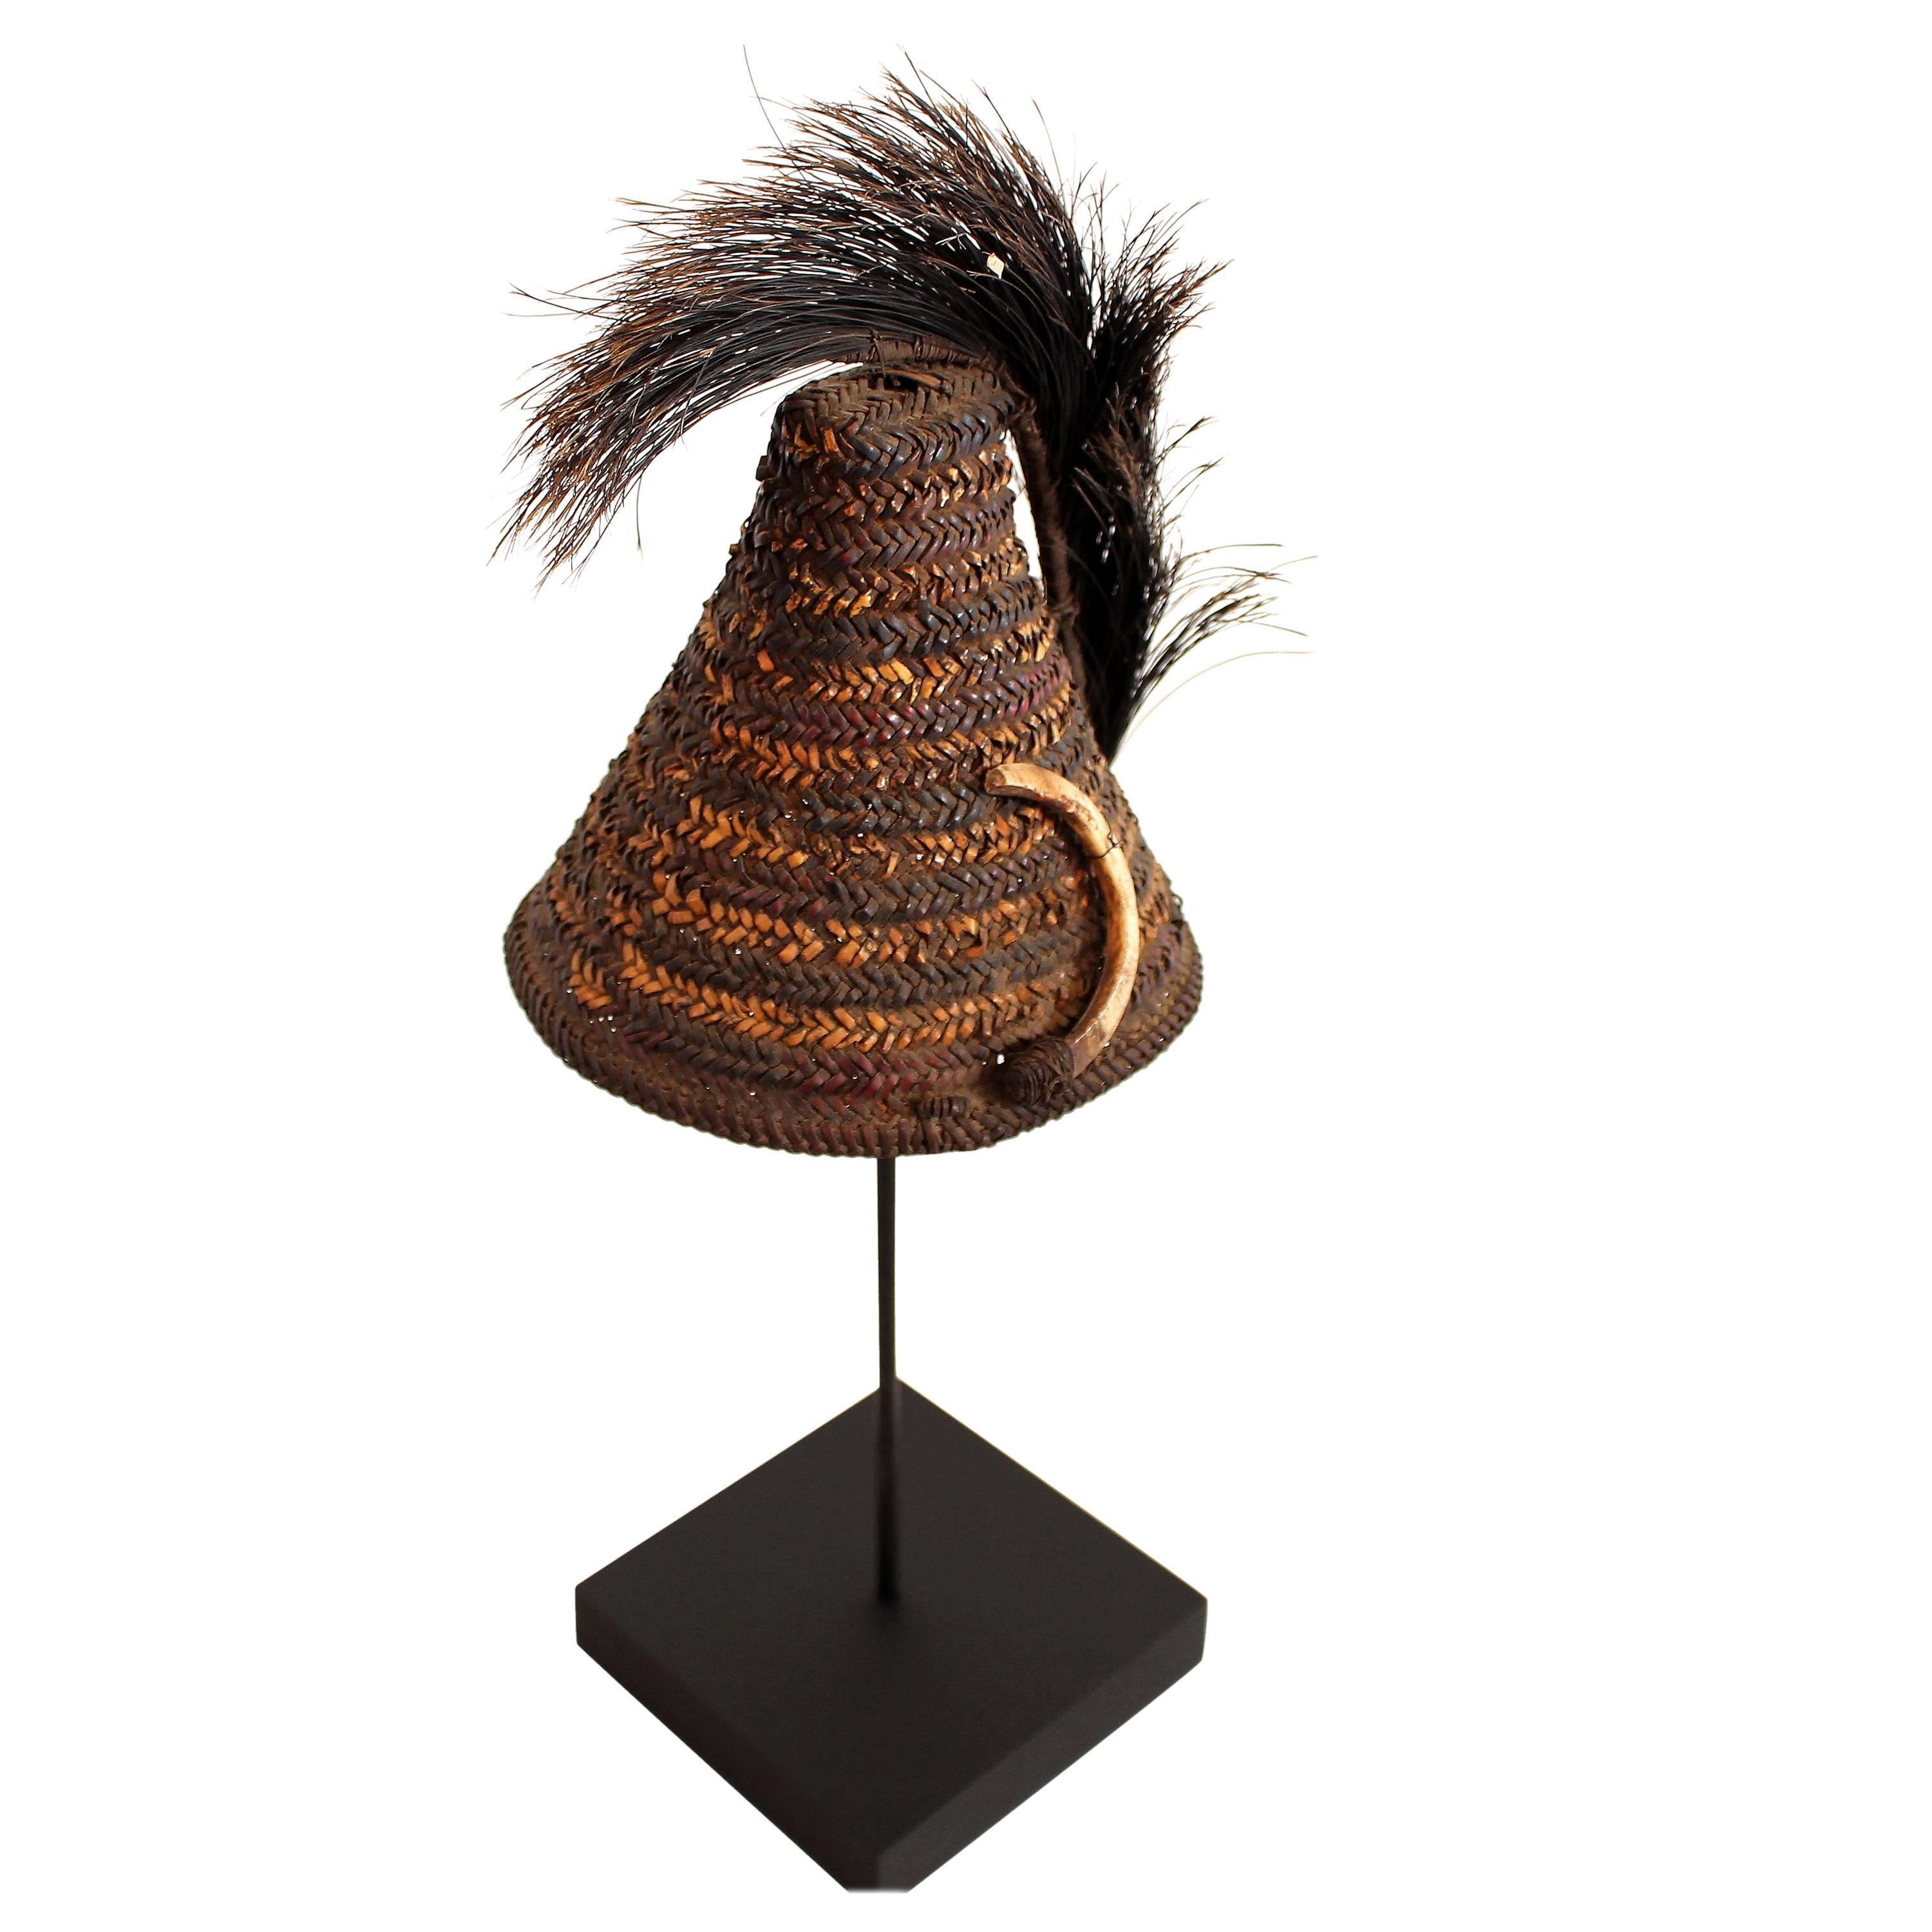 Naga Warrior’s Hat with Boar’s Tusk and Fur Plume